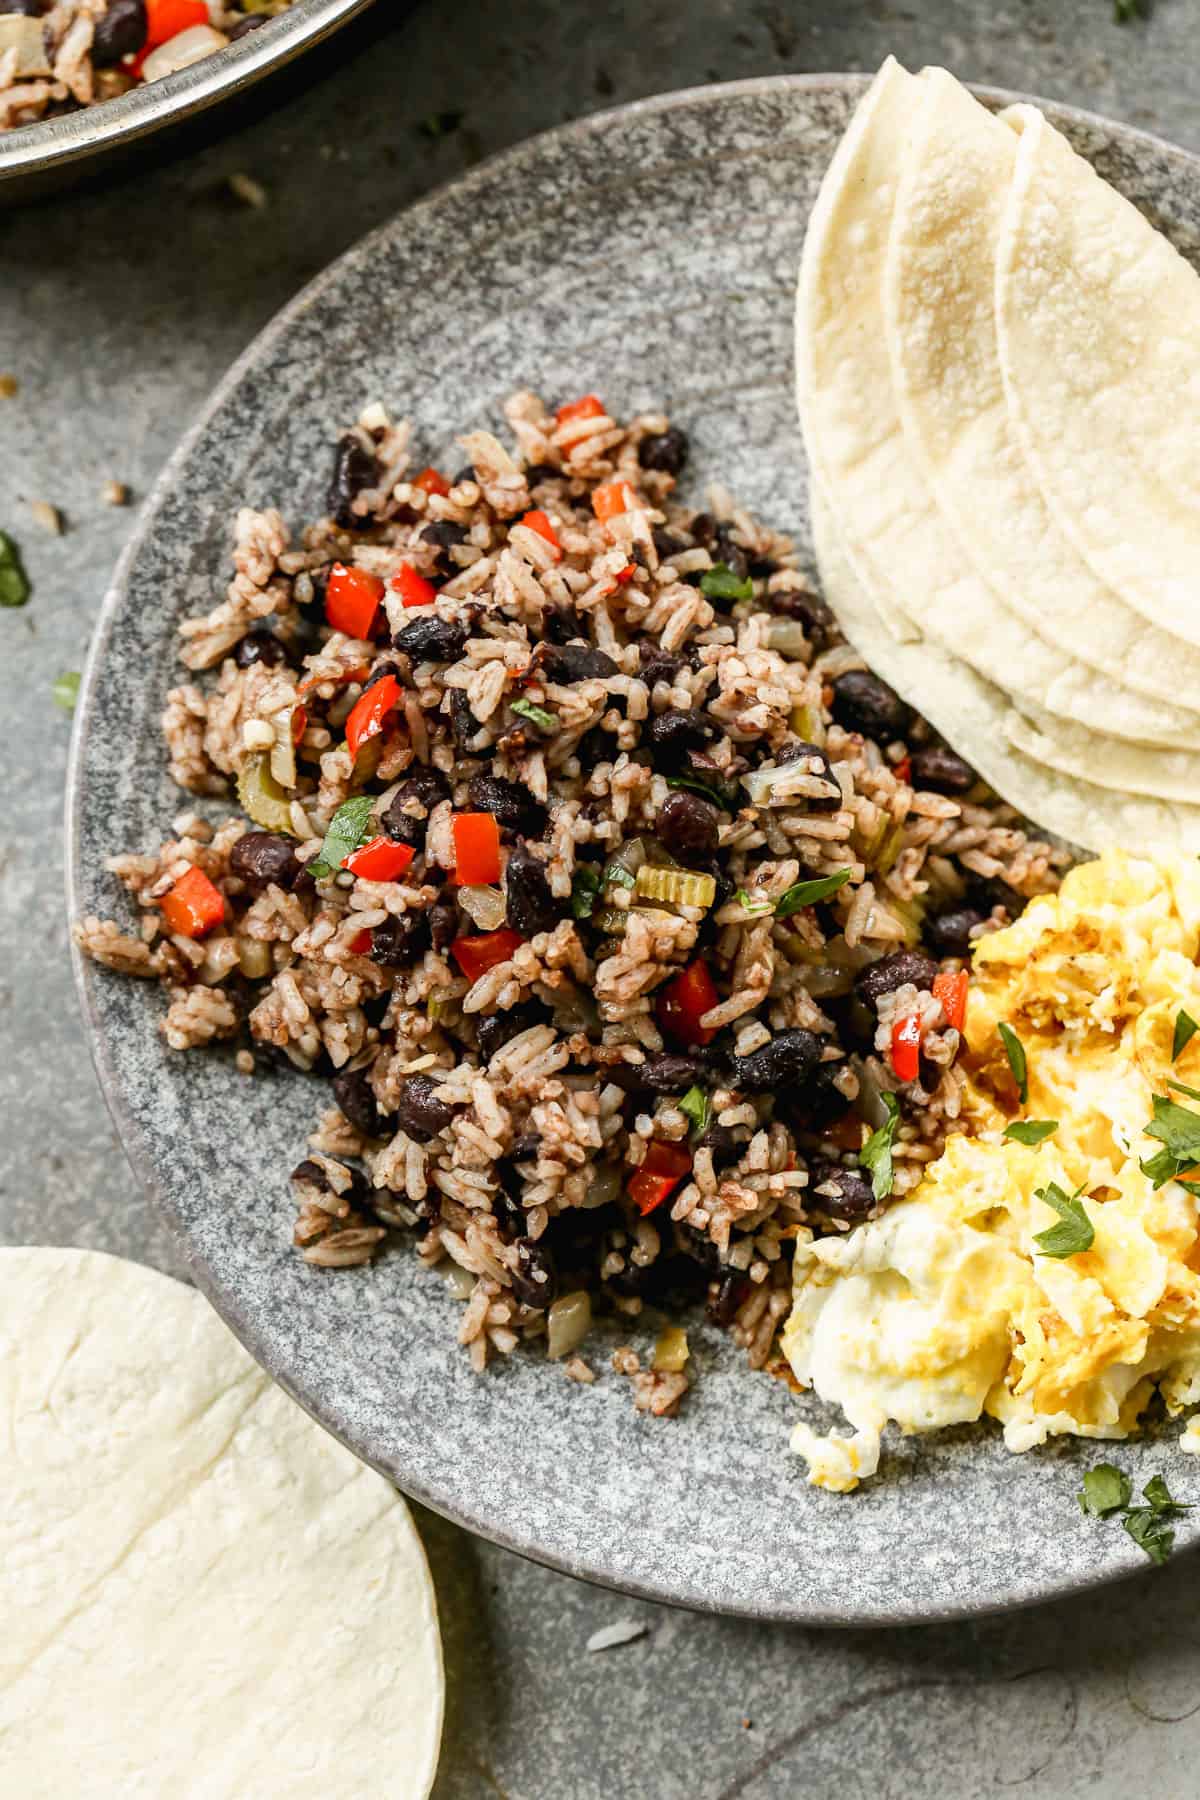 A delicious Gallo Pinto breakfast plate with a serving of gallo pinto, scrambled eggs, and a couple warm tortillas.